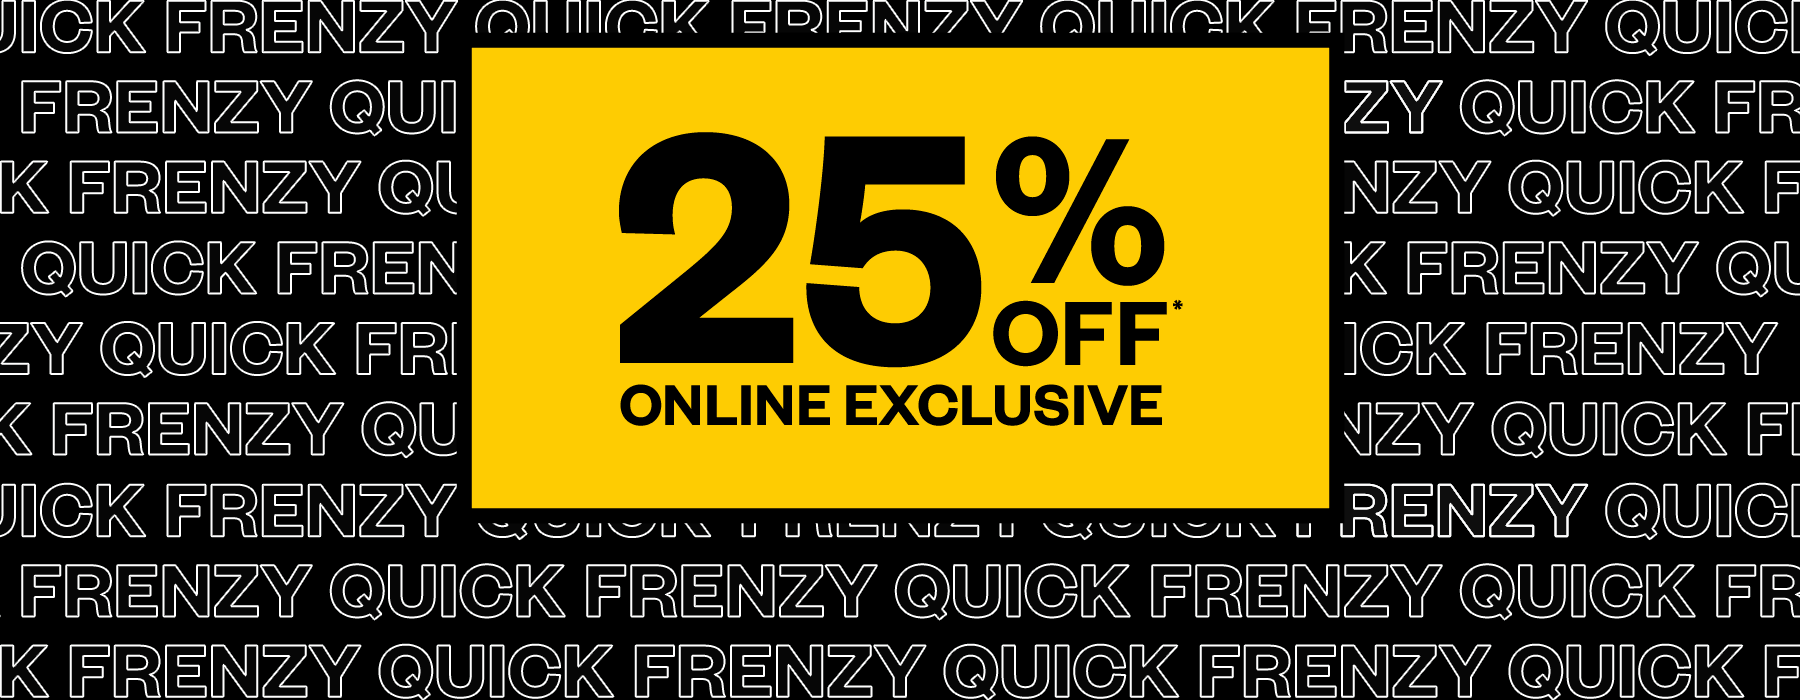 25% OFF on online exclusives